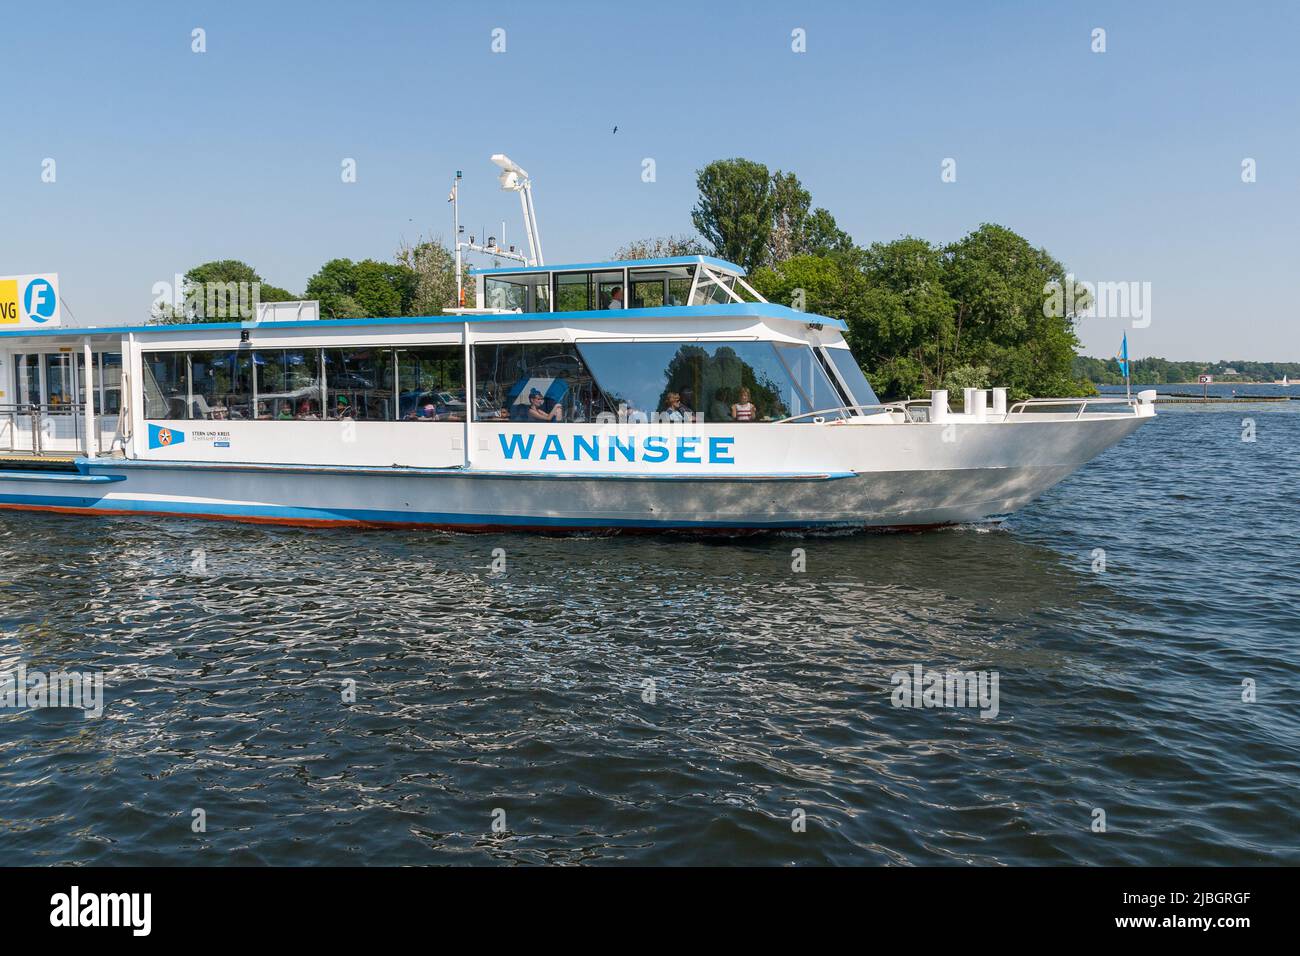 The Kladow to Wansee ferry, Berlin Stock Photo